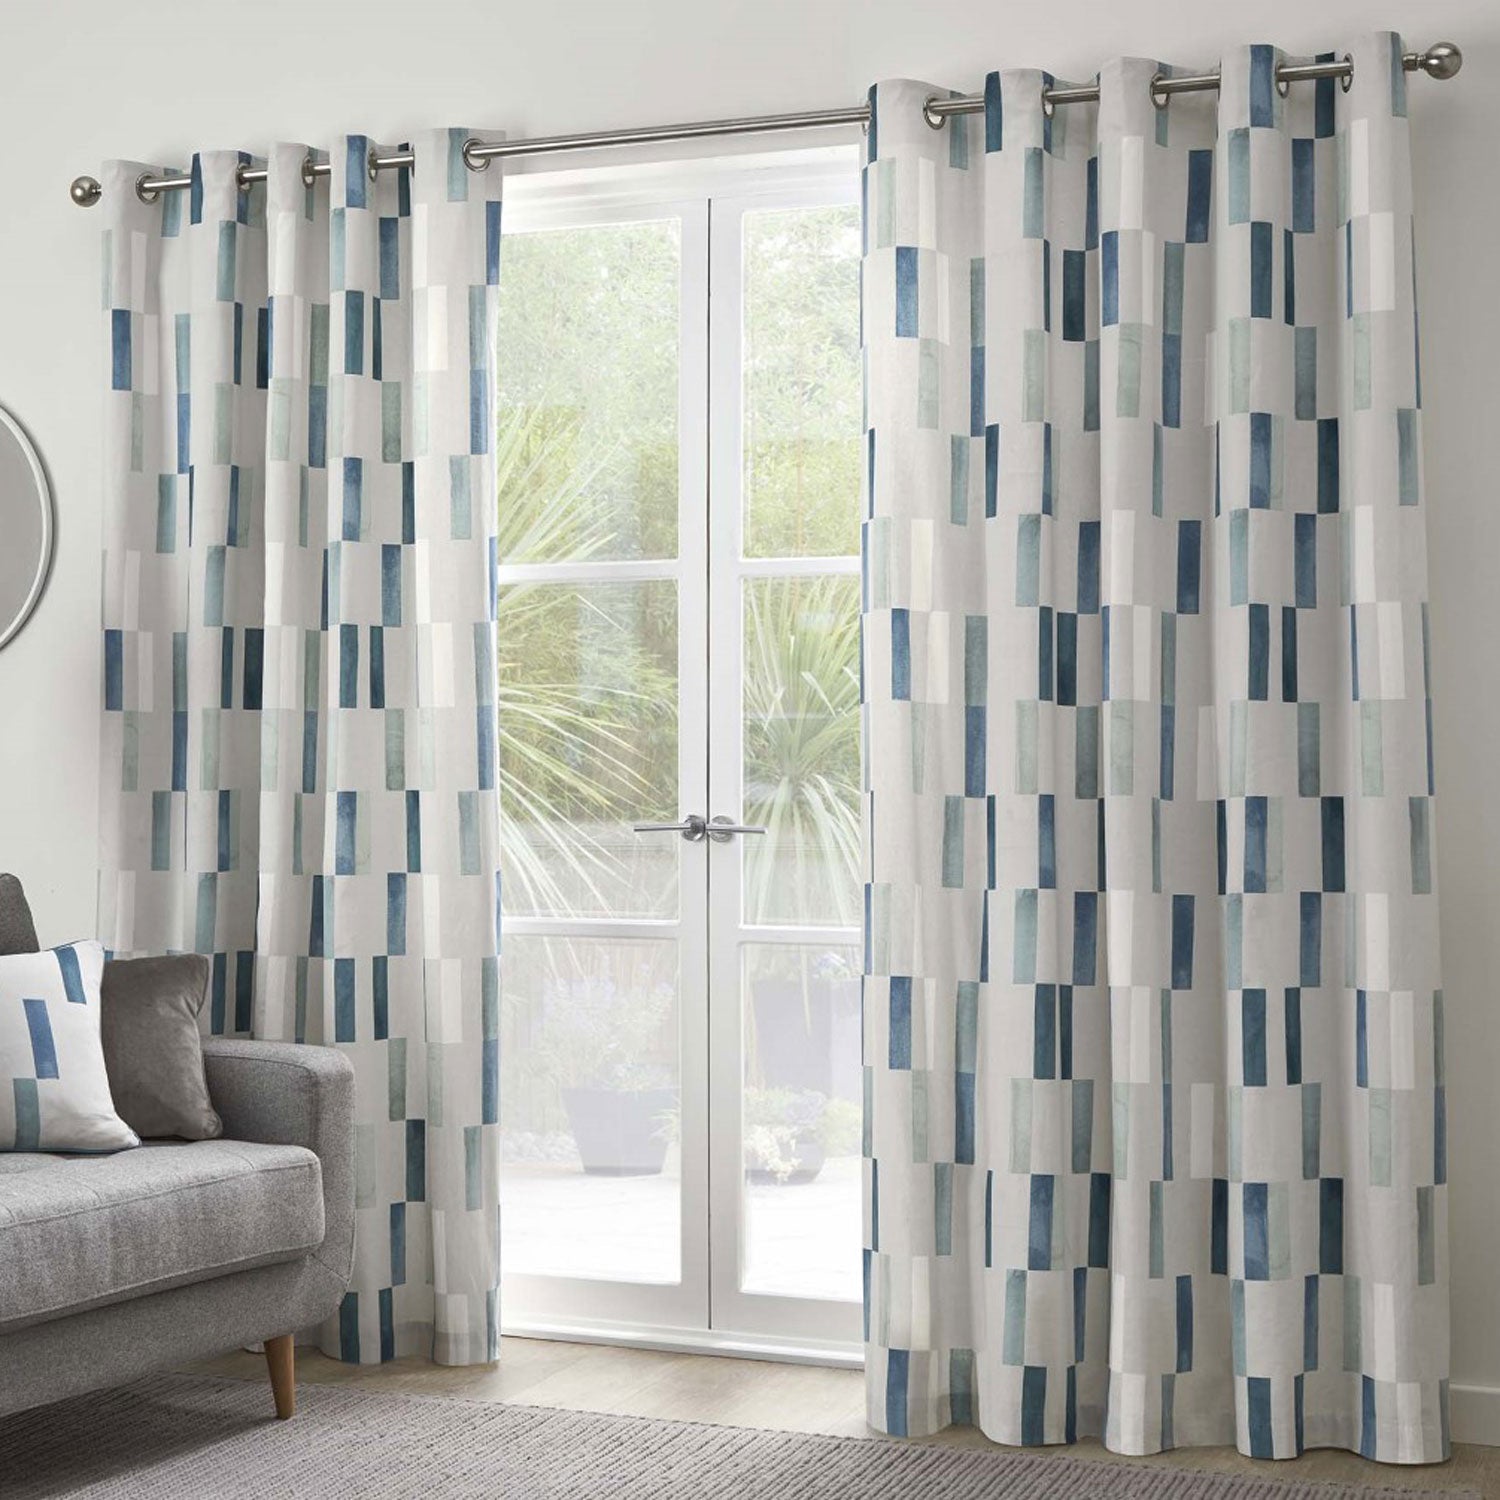 The Home Bedroom Oakland Eyelet Curtains - Teal 1 Shaws Department Stores